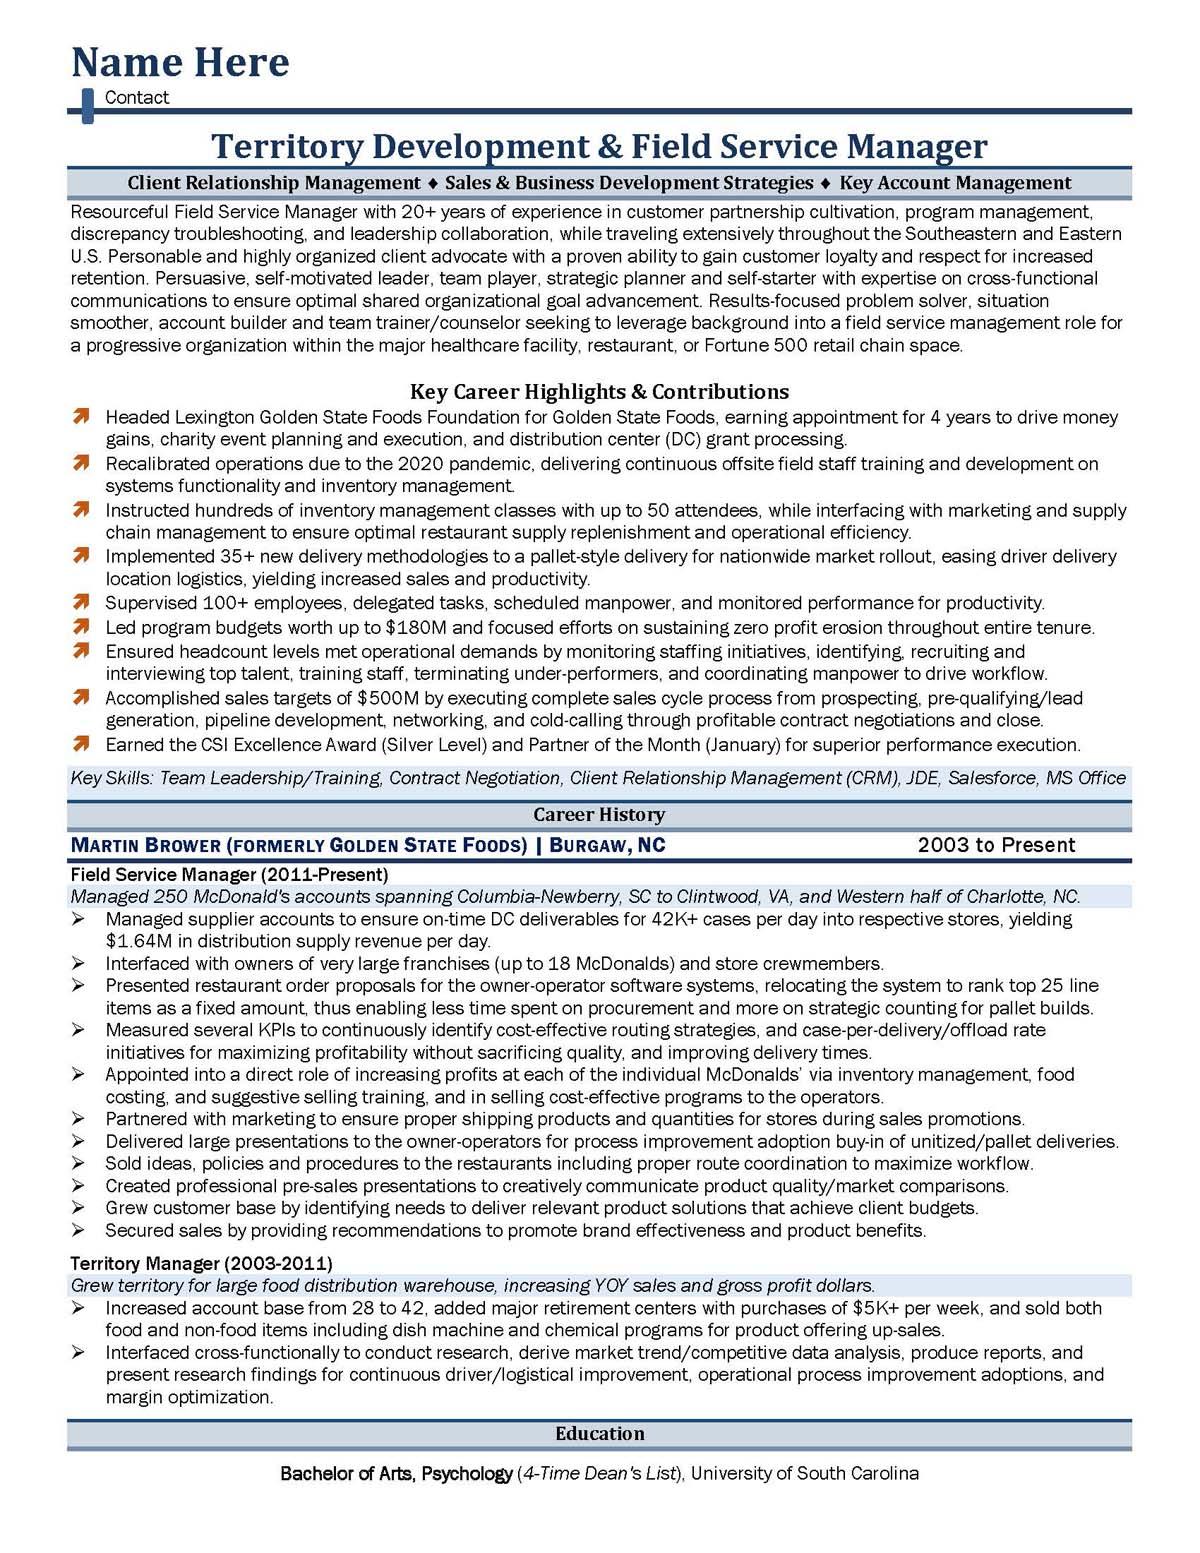 Sample resume: Business Administration and Management, High Experience, Combination